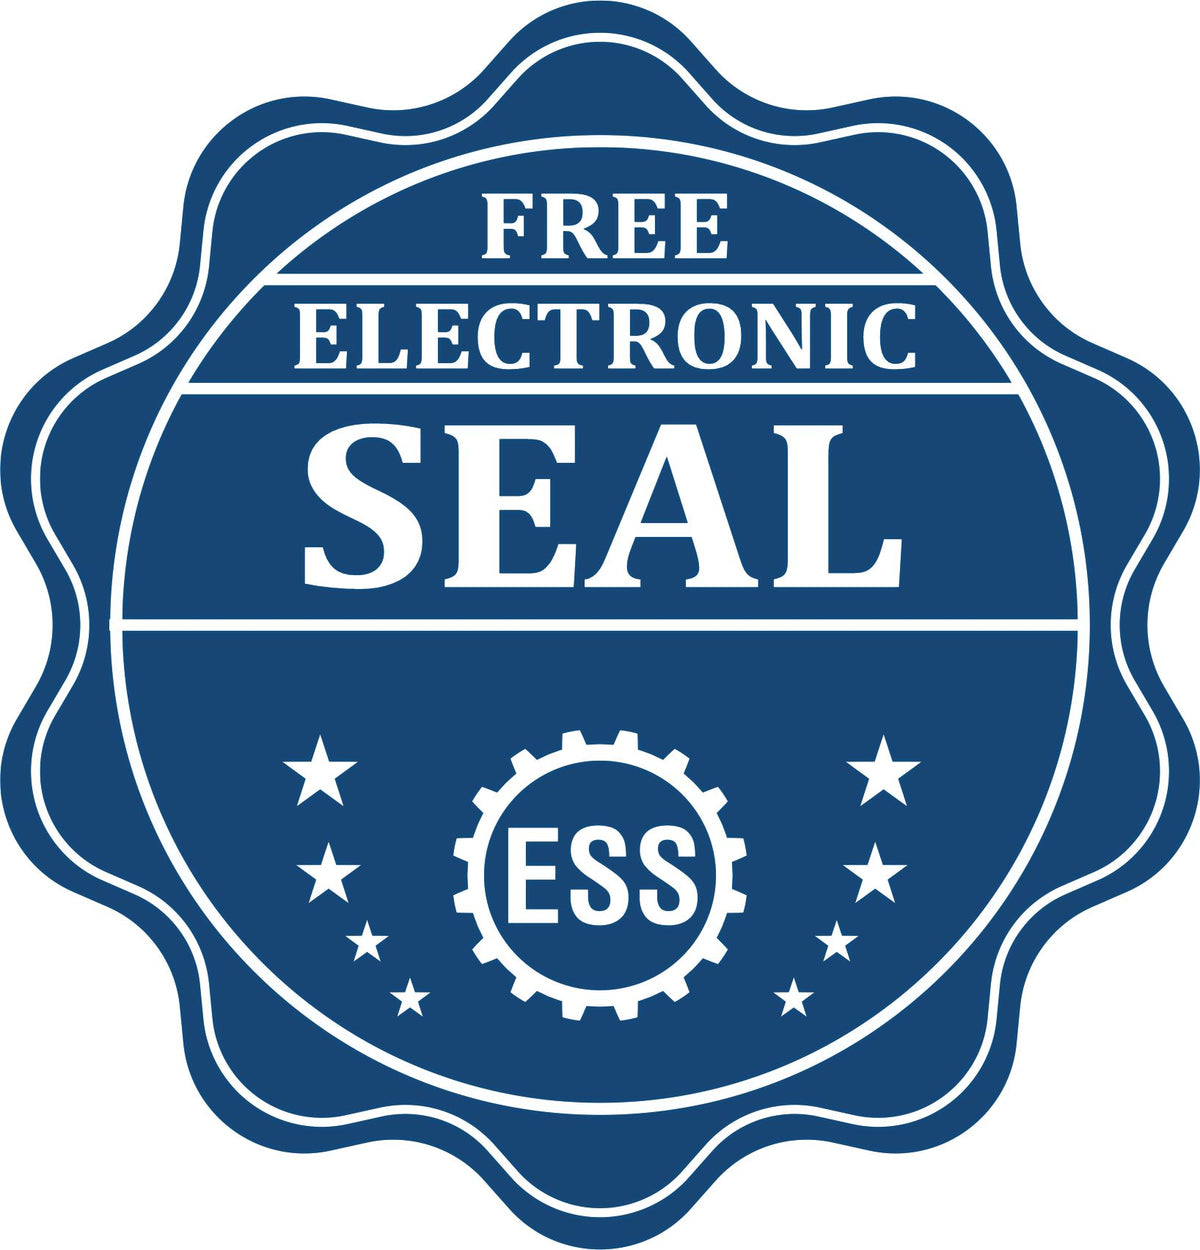 A badge showing a free electronic seal for the Premium MaxLight Pre-Inked Tennessee Engineering Stamp with stars and the ESS gear on the emblem.